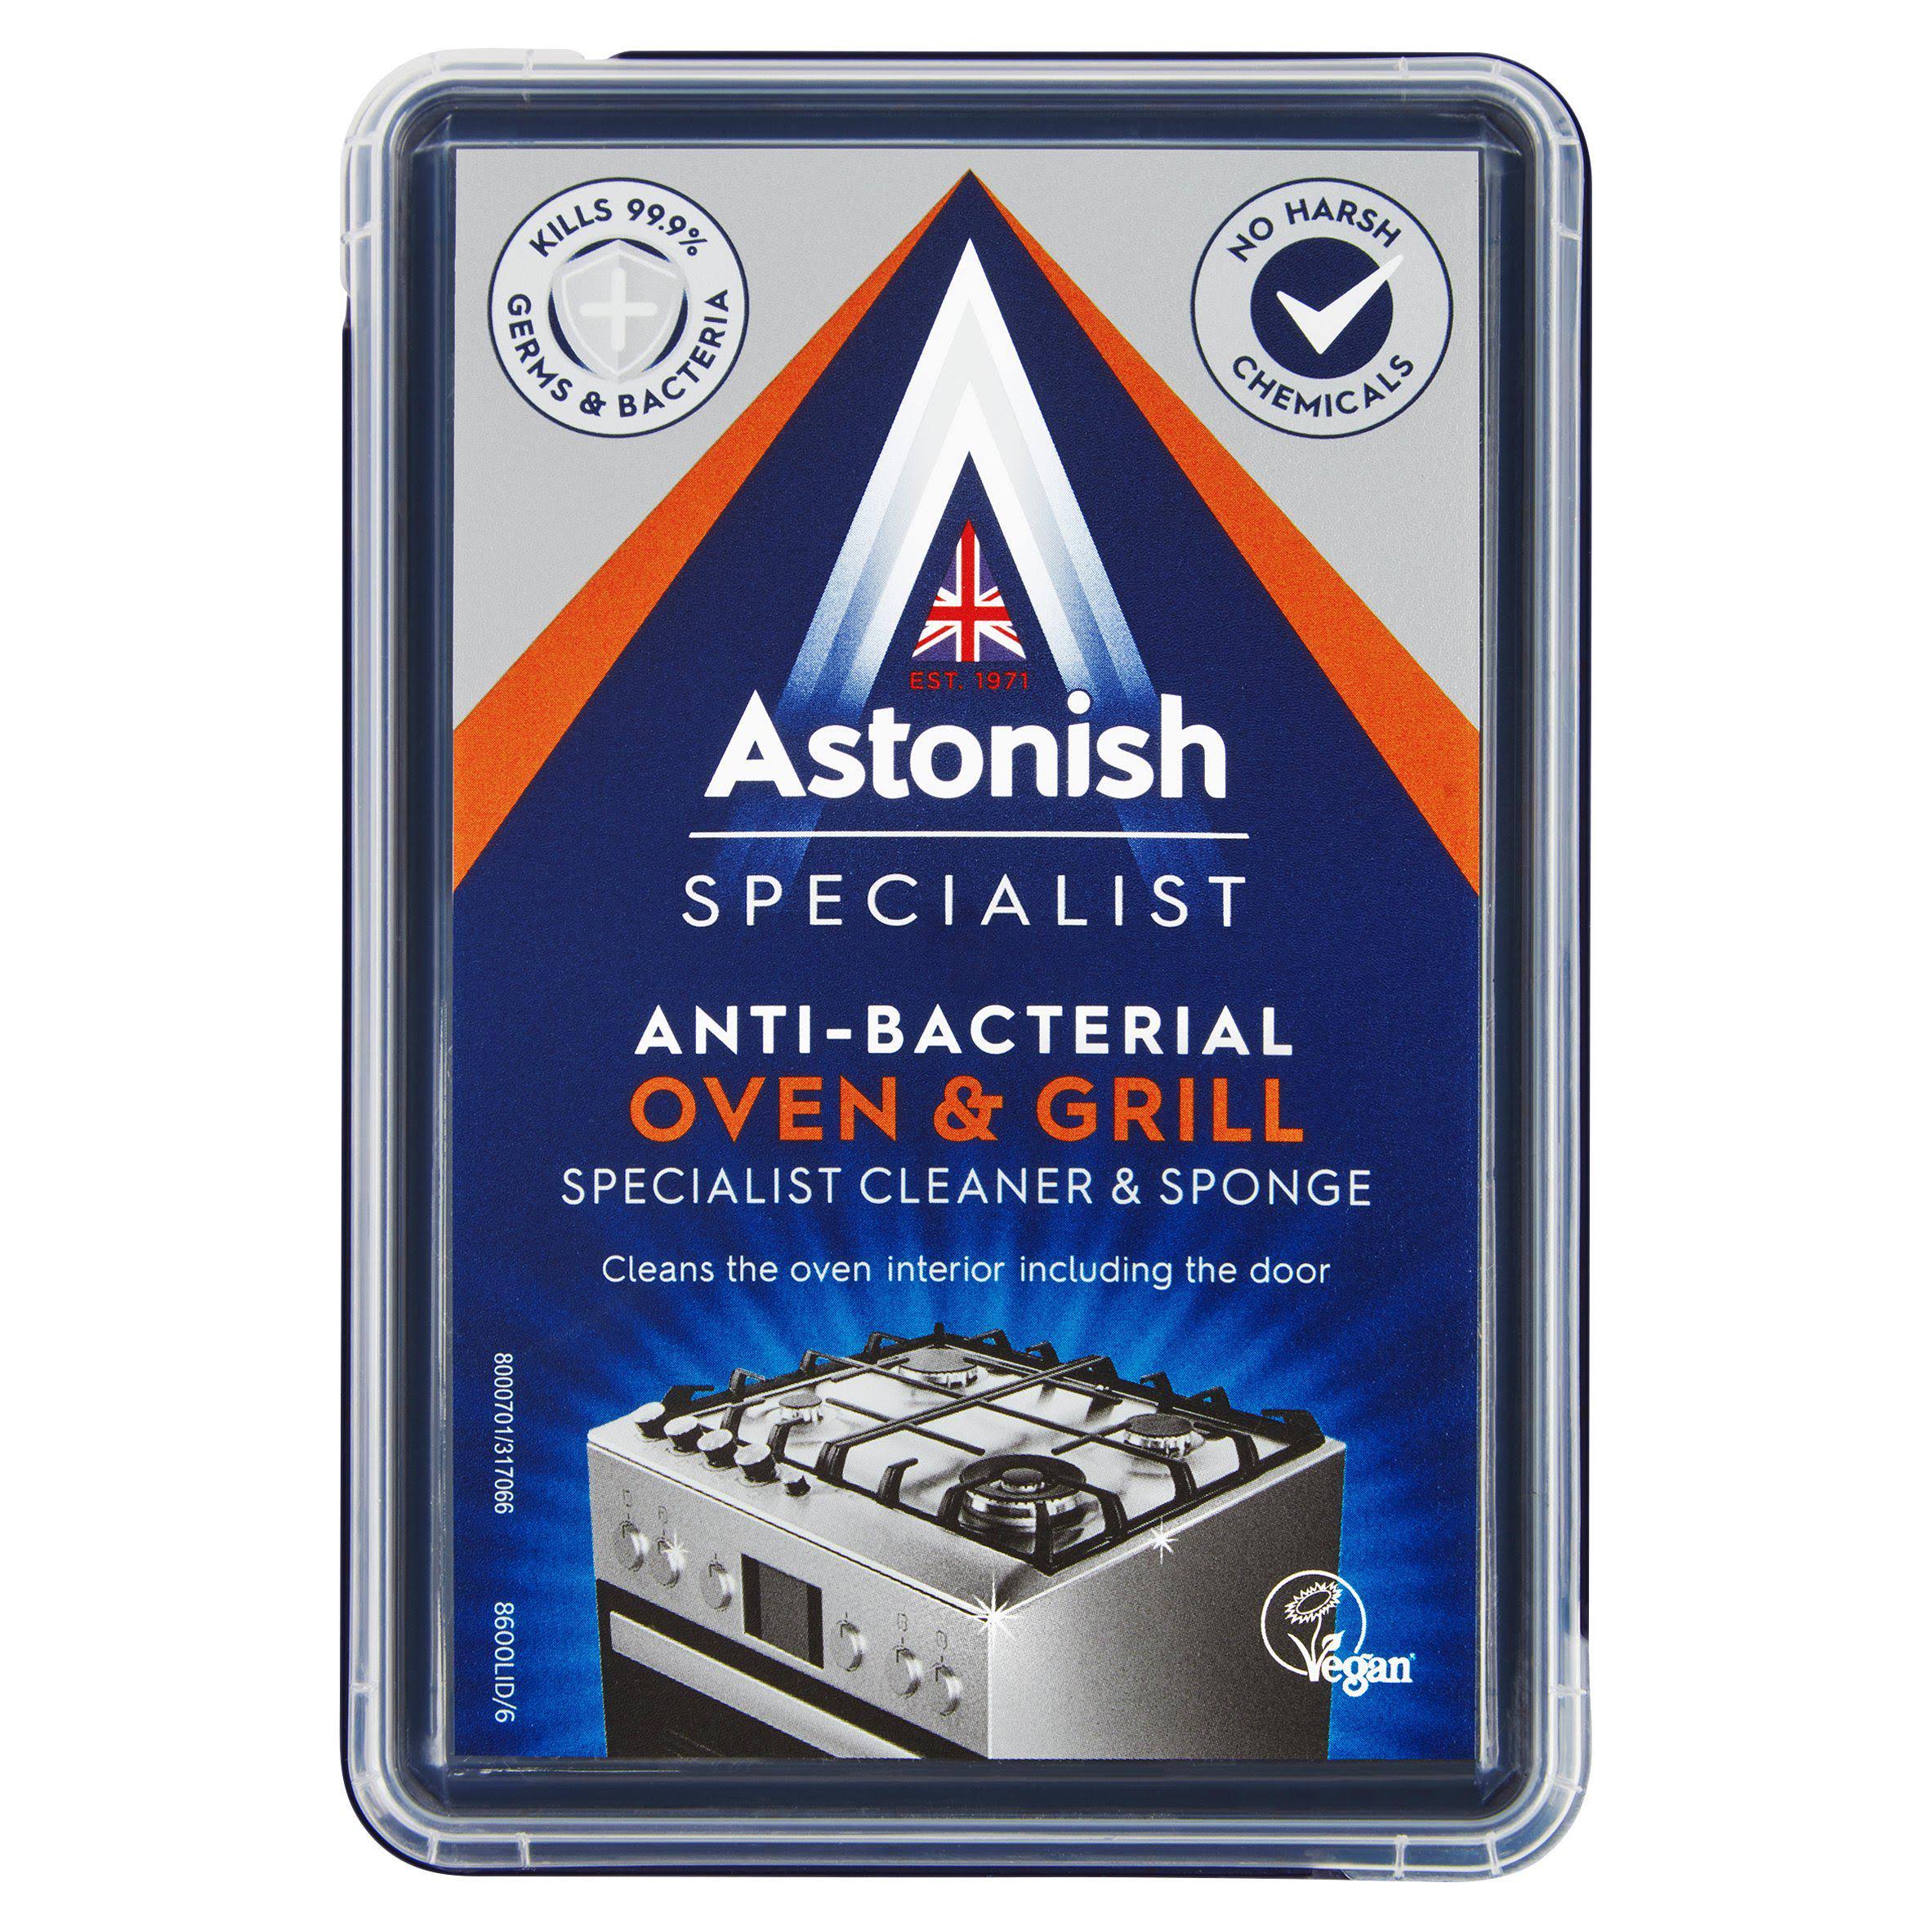 Astonish Specialist Oven and Grill Cleaner and Sponge - 250g